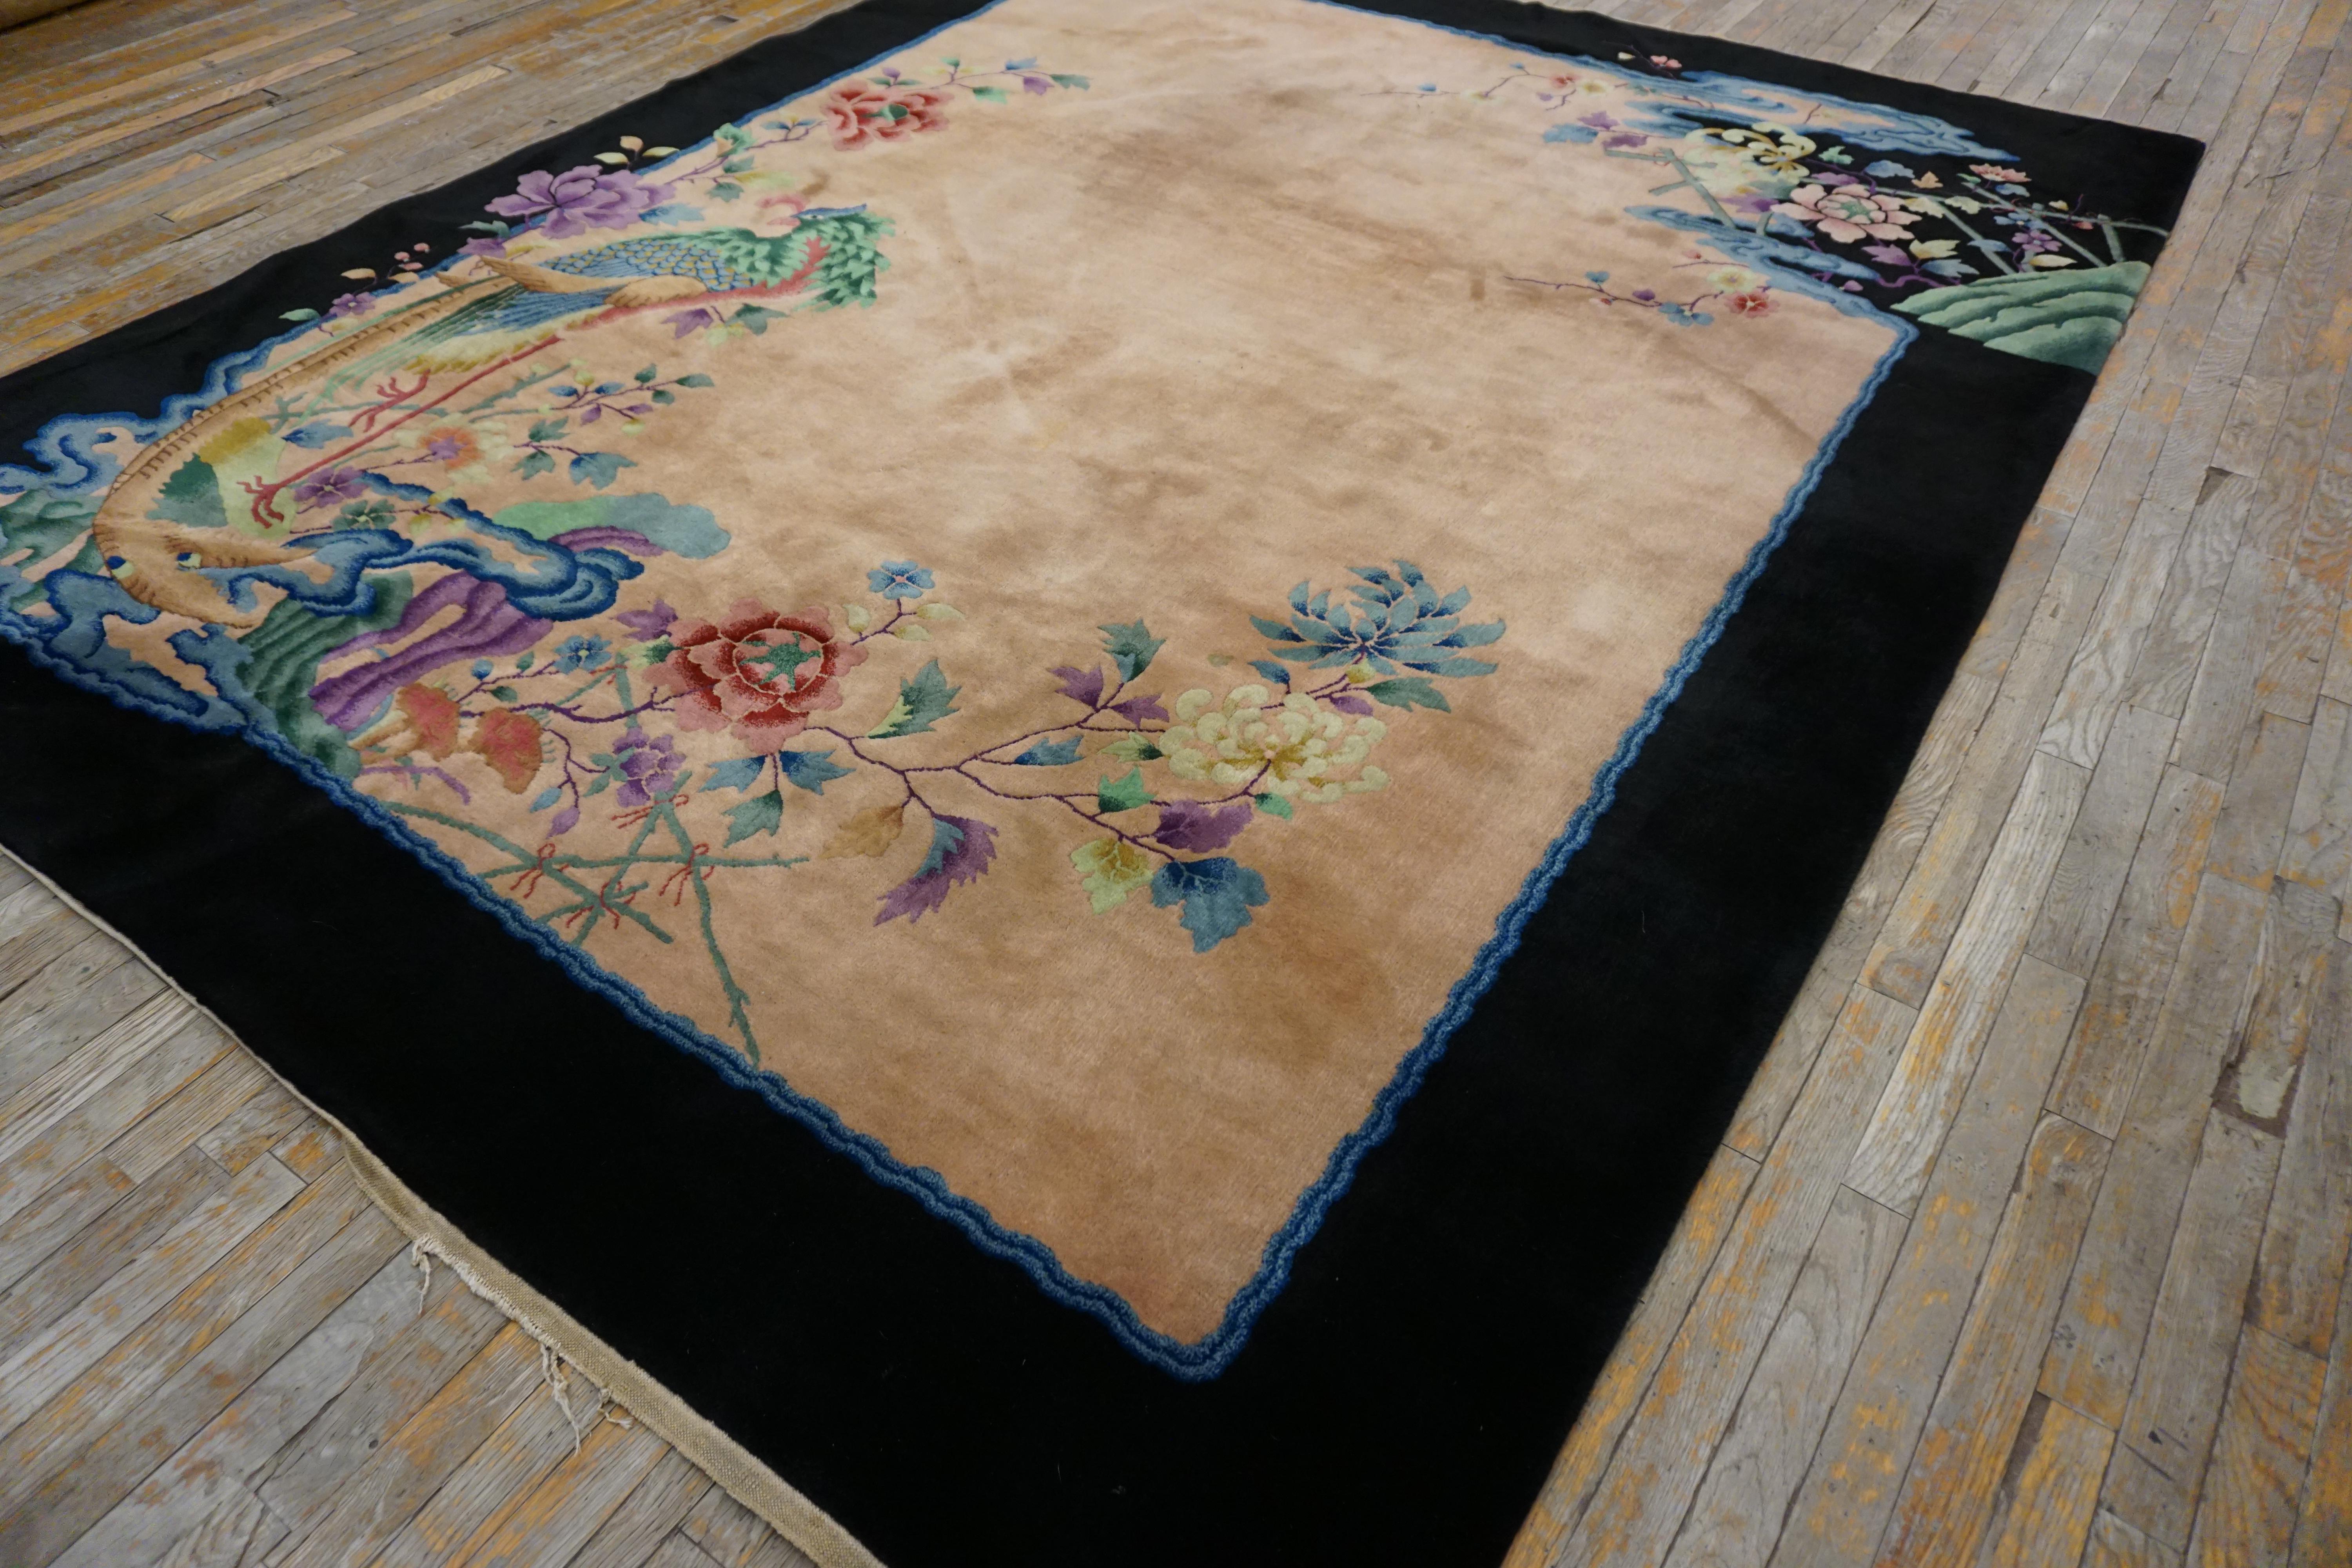 Hand-Knotted 1920s Chinese Art Deco Carpet Made by Nichols Workshop (7'10